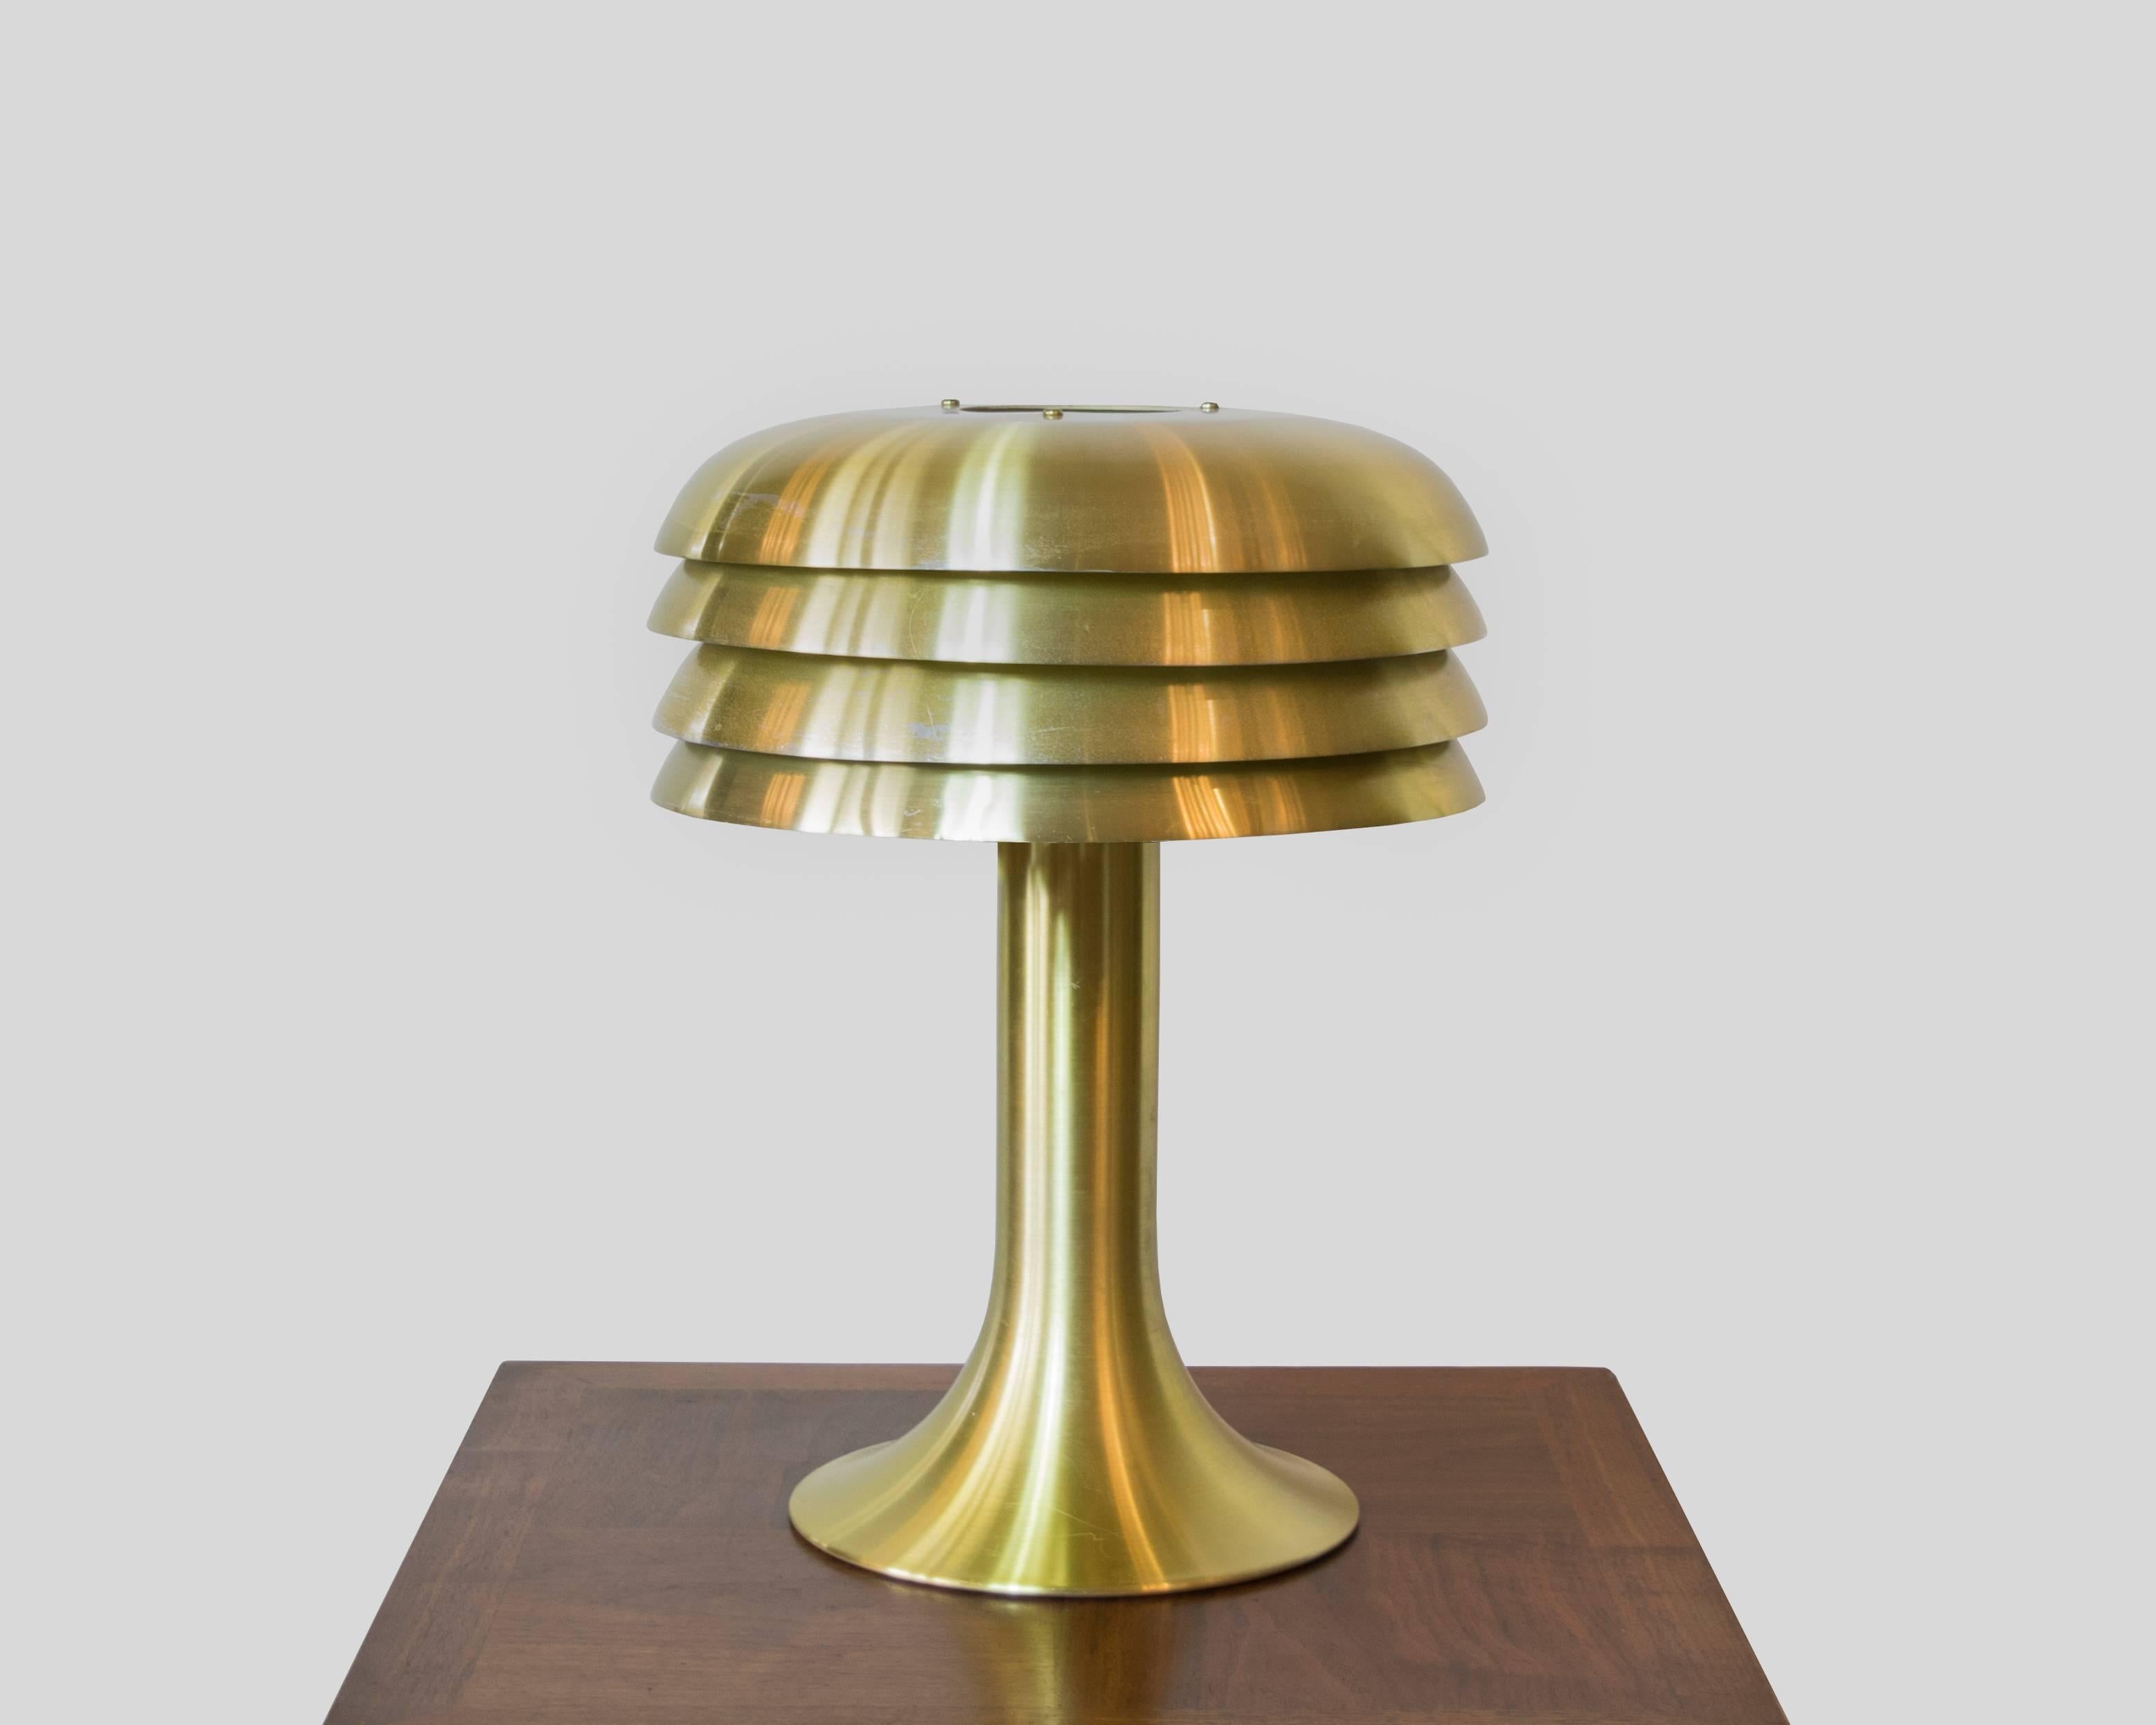 Rare pair of table lamps designed and produced by Hans-Agne Jakobbson in the 1950s.